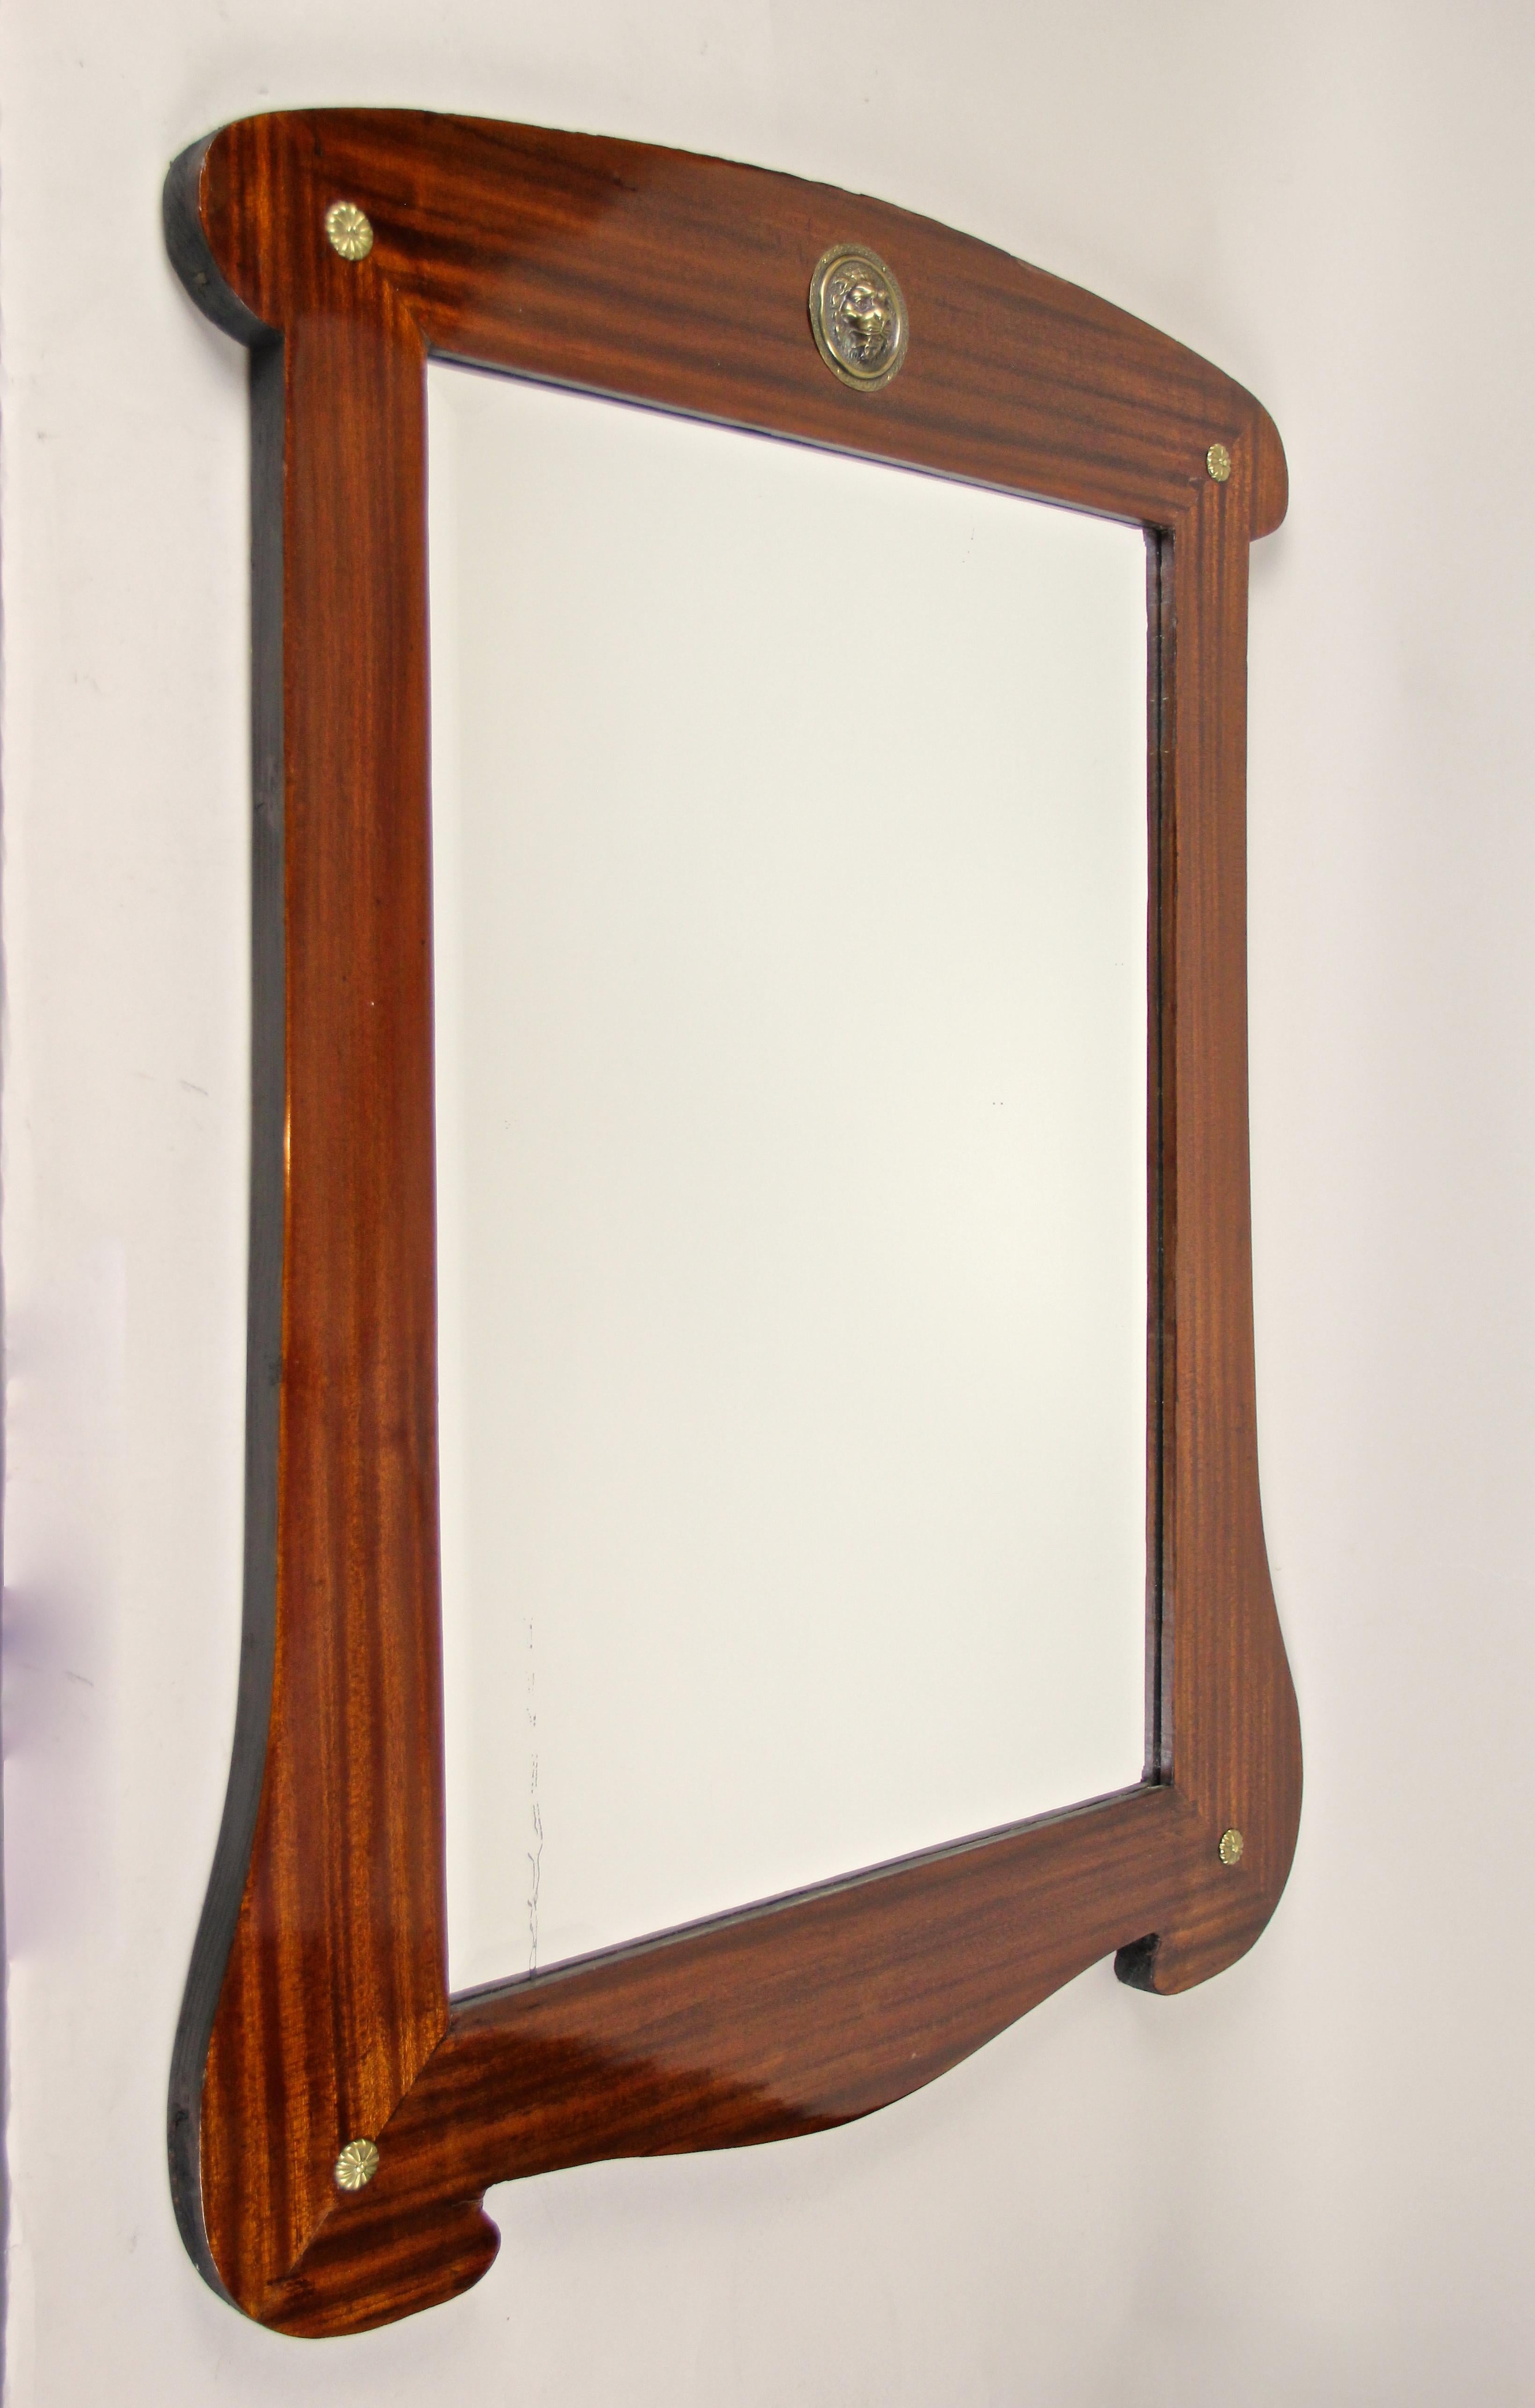 Beautiful mahogany wall mirror from the famous Art Nouveau period in Austria, circa 1900. The newly restored mahogany frame impresses with an artistic combination of rounded edges, curved lines and smooth edges, that all work together beautifully